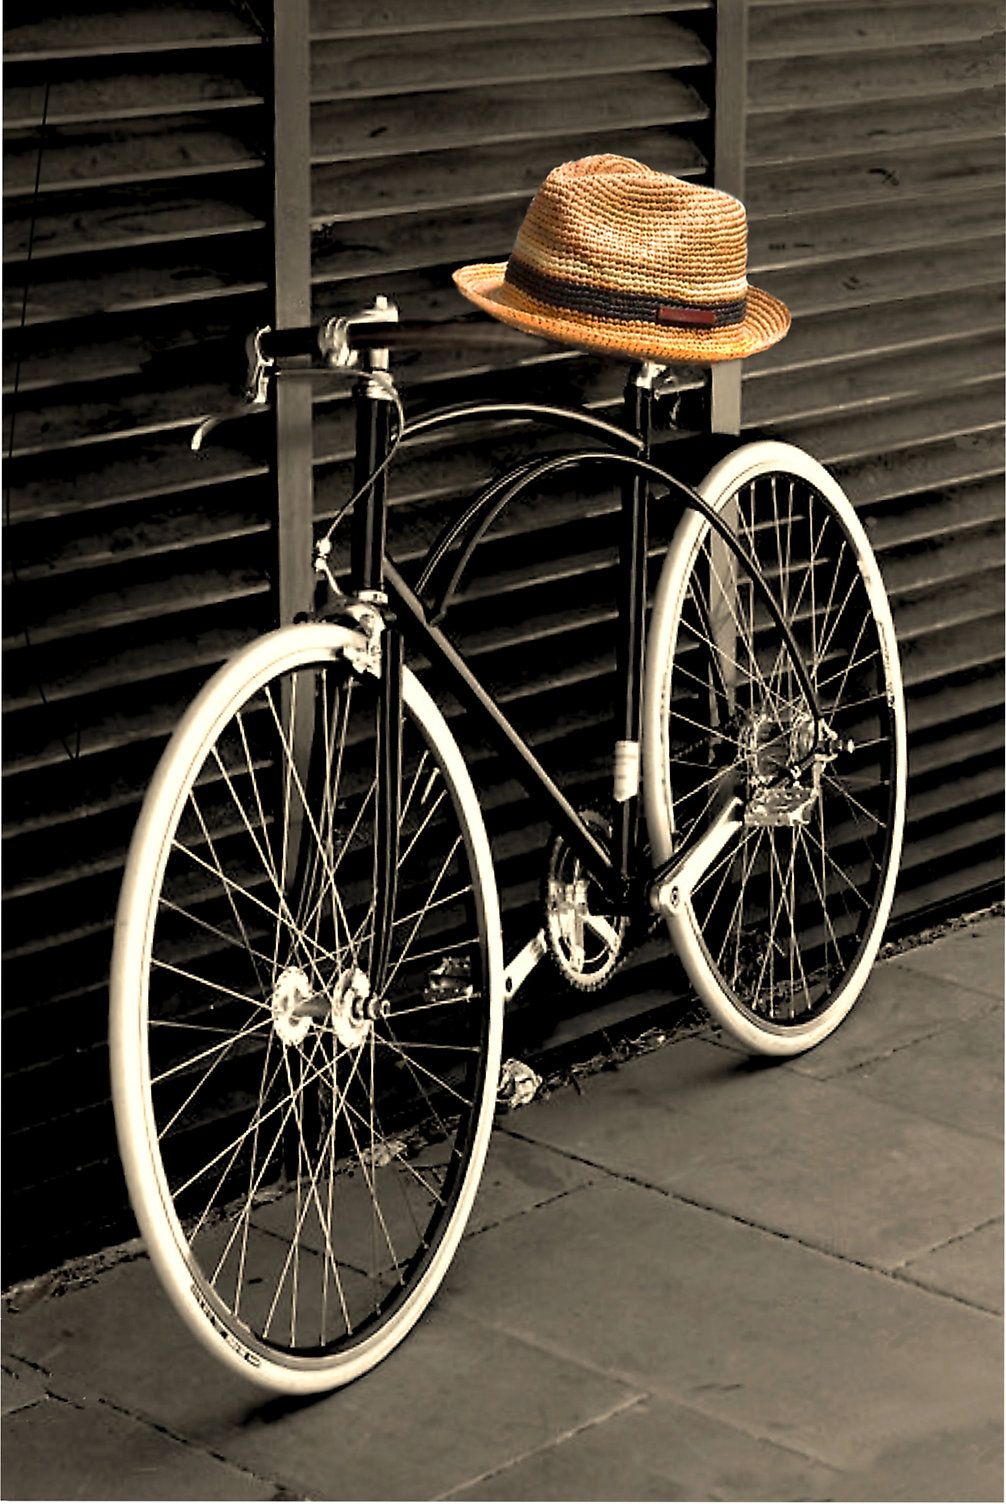 A Hat On Top Of A Bicycle